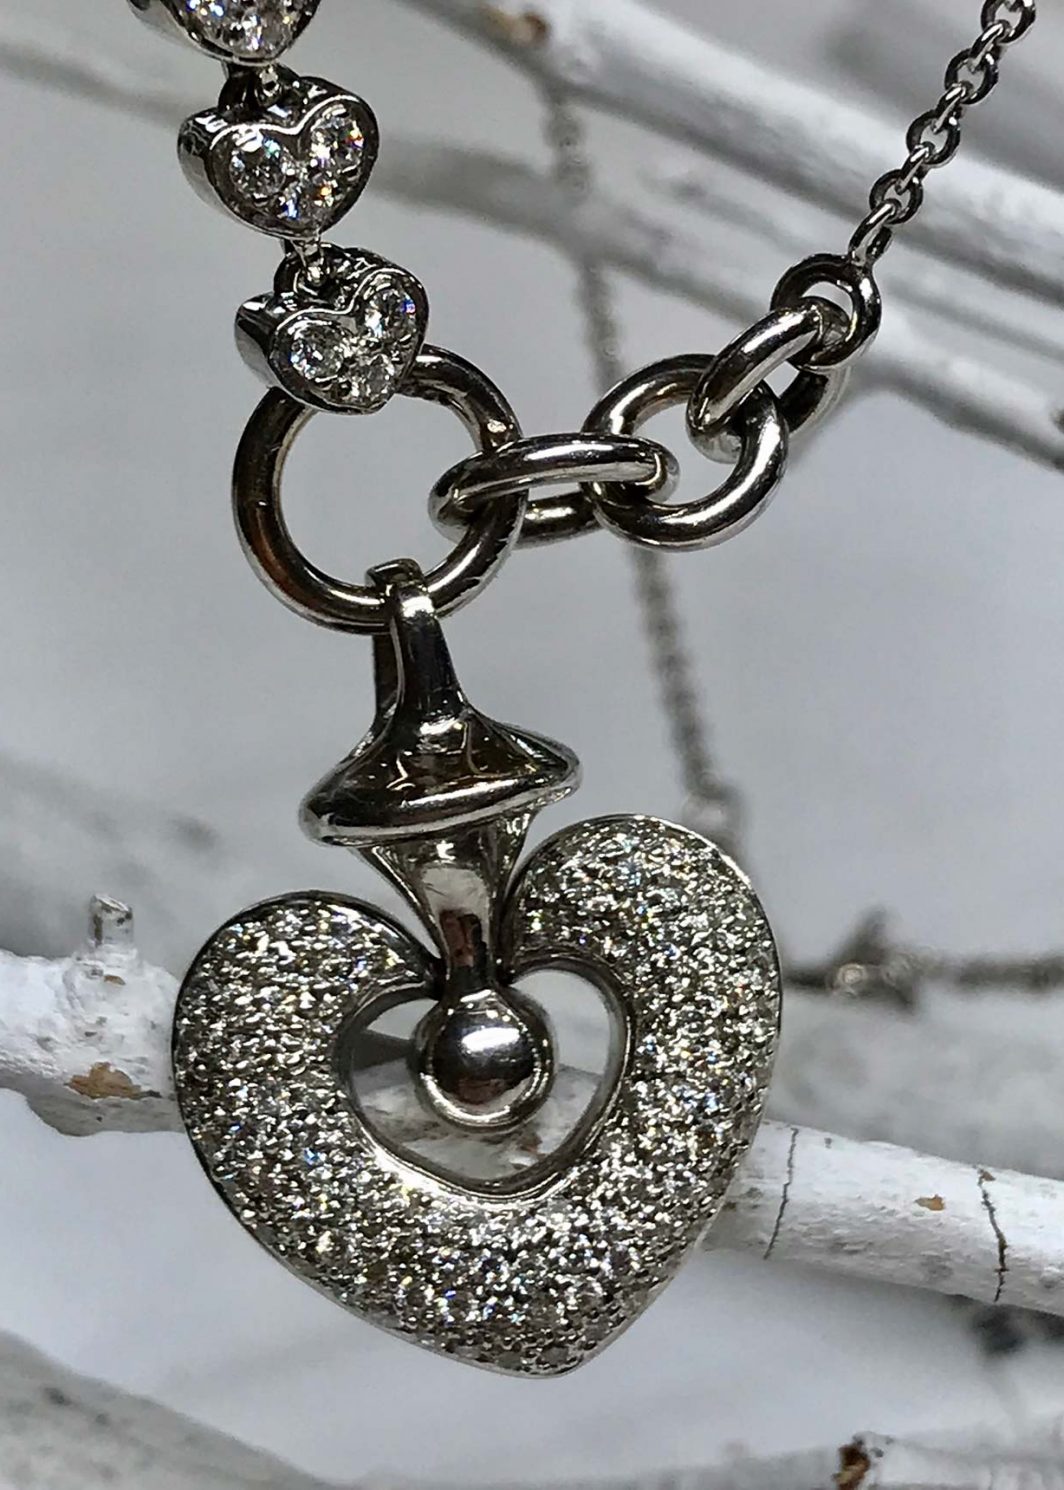 Lady's Necklace with Diamond Heart Pendant